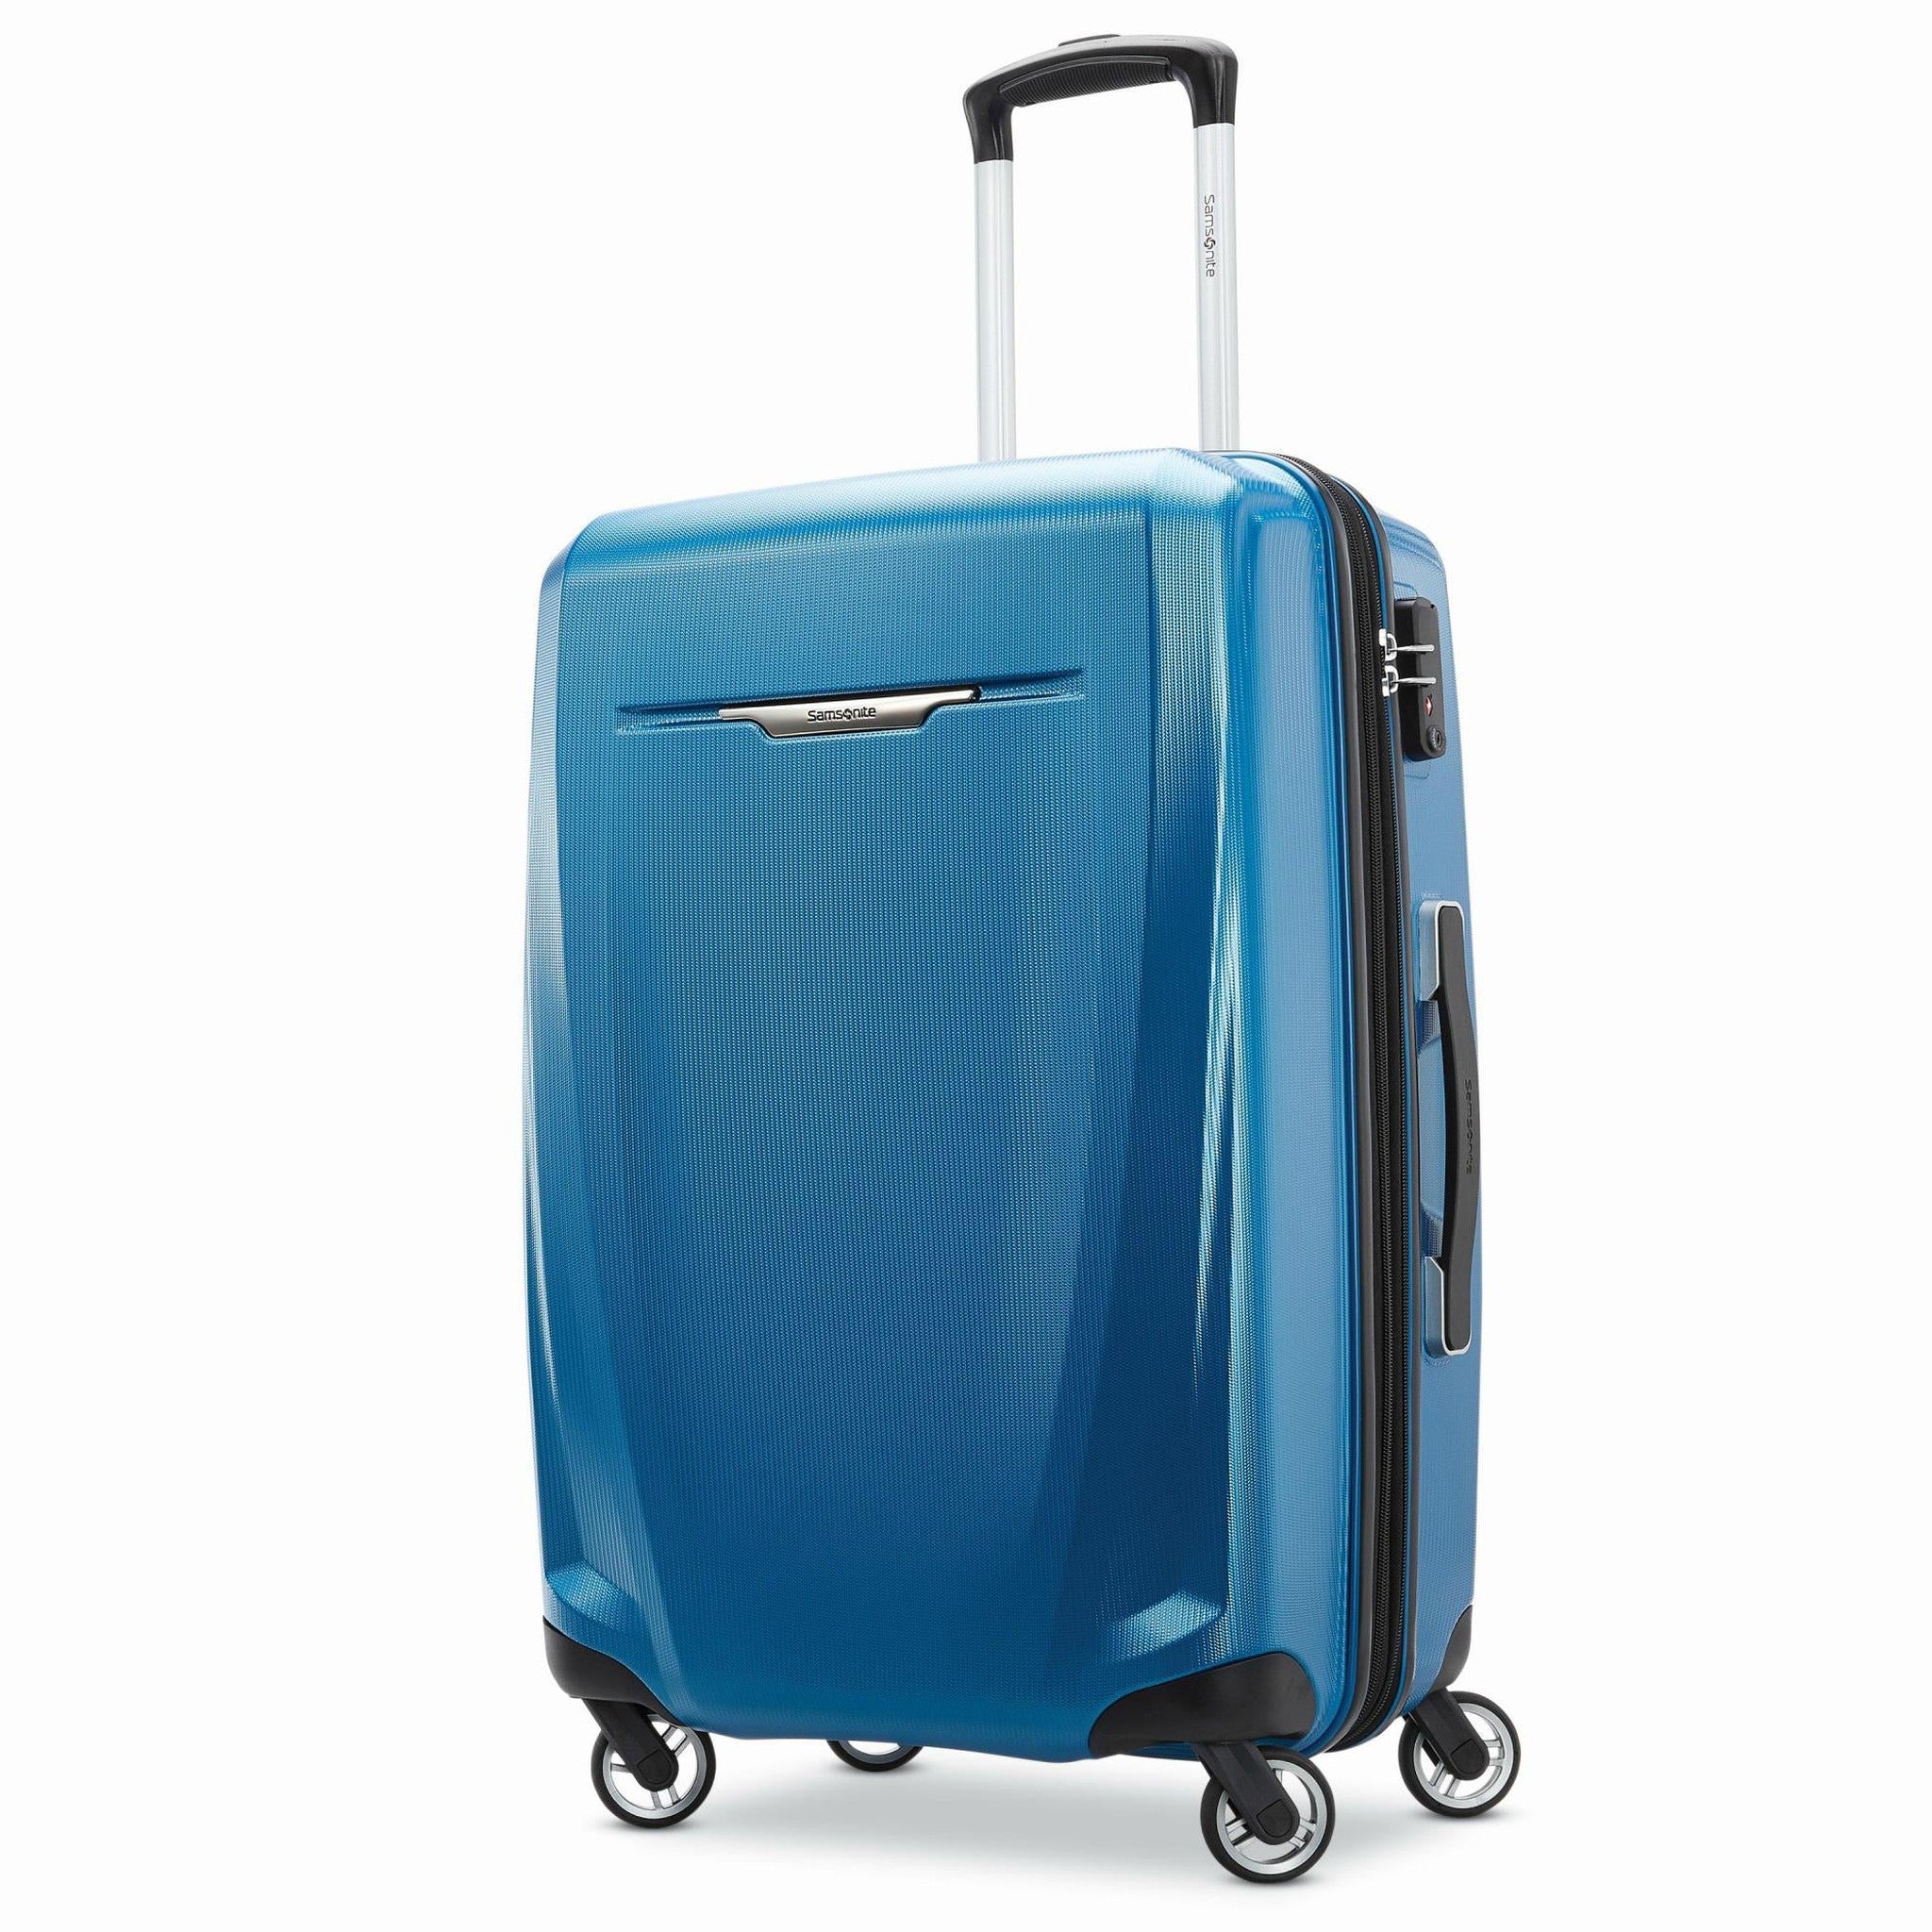 Samsonite Winfield 3 DLX Spinner 71/25 Checked Luggage – Luggage Pros